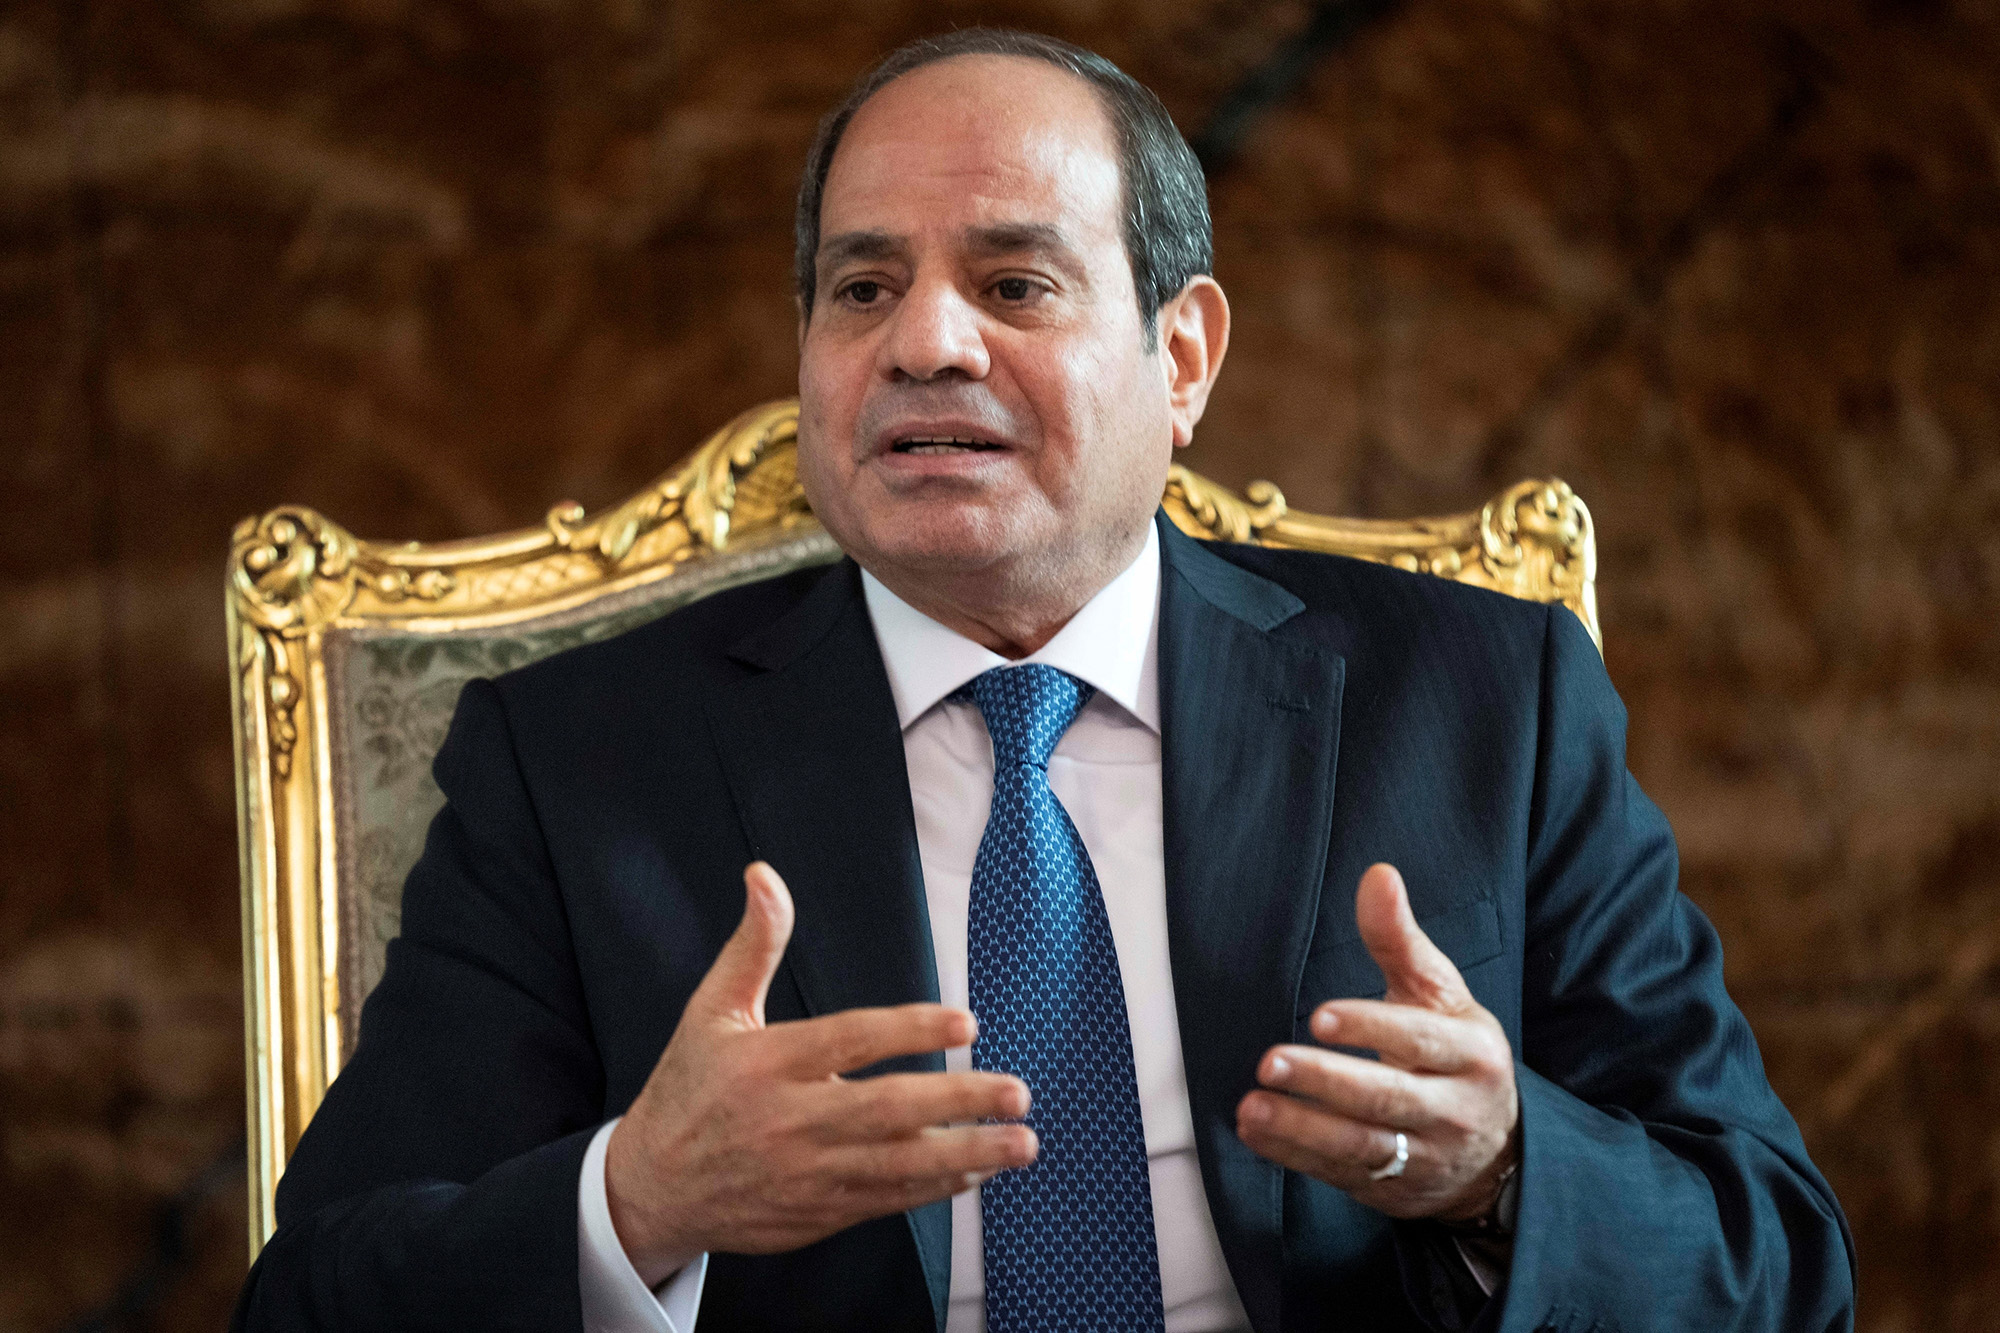 Egyptian President Abdel Fattah el-Sisi spoke during a meeting with US Secretary of State Anthony Blinken at Al-Ittihadiya Palace in Cairo in October.